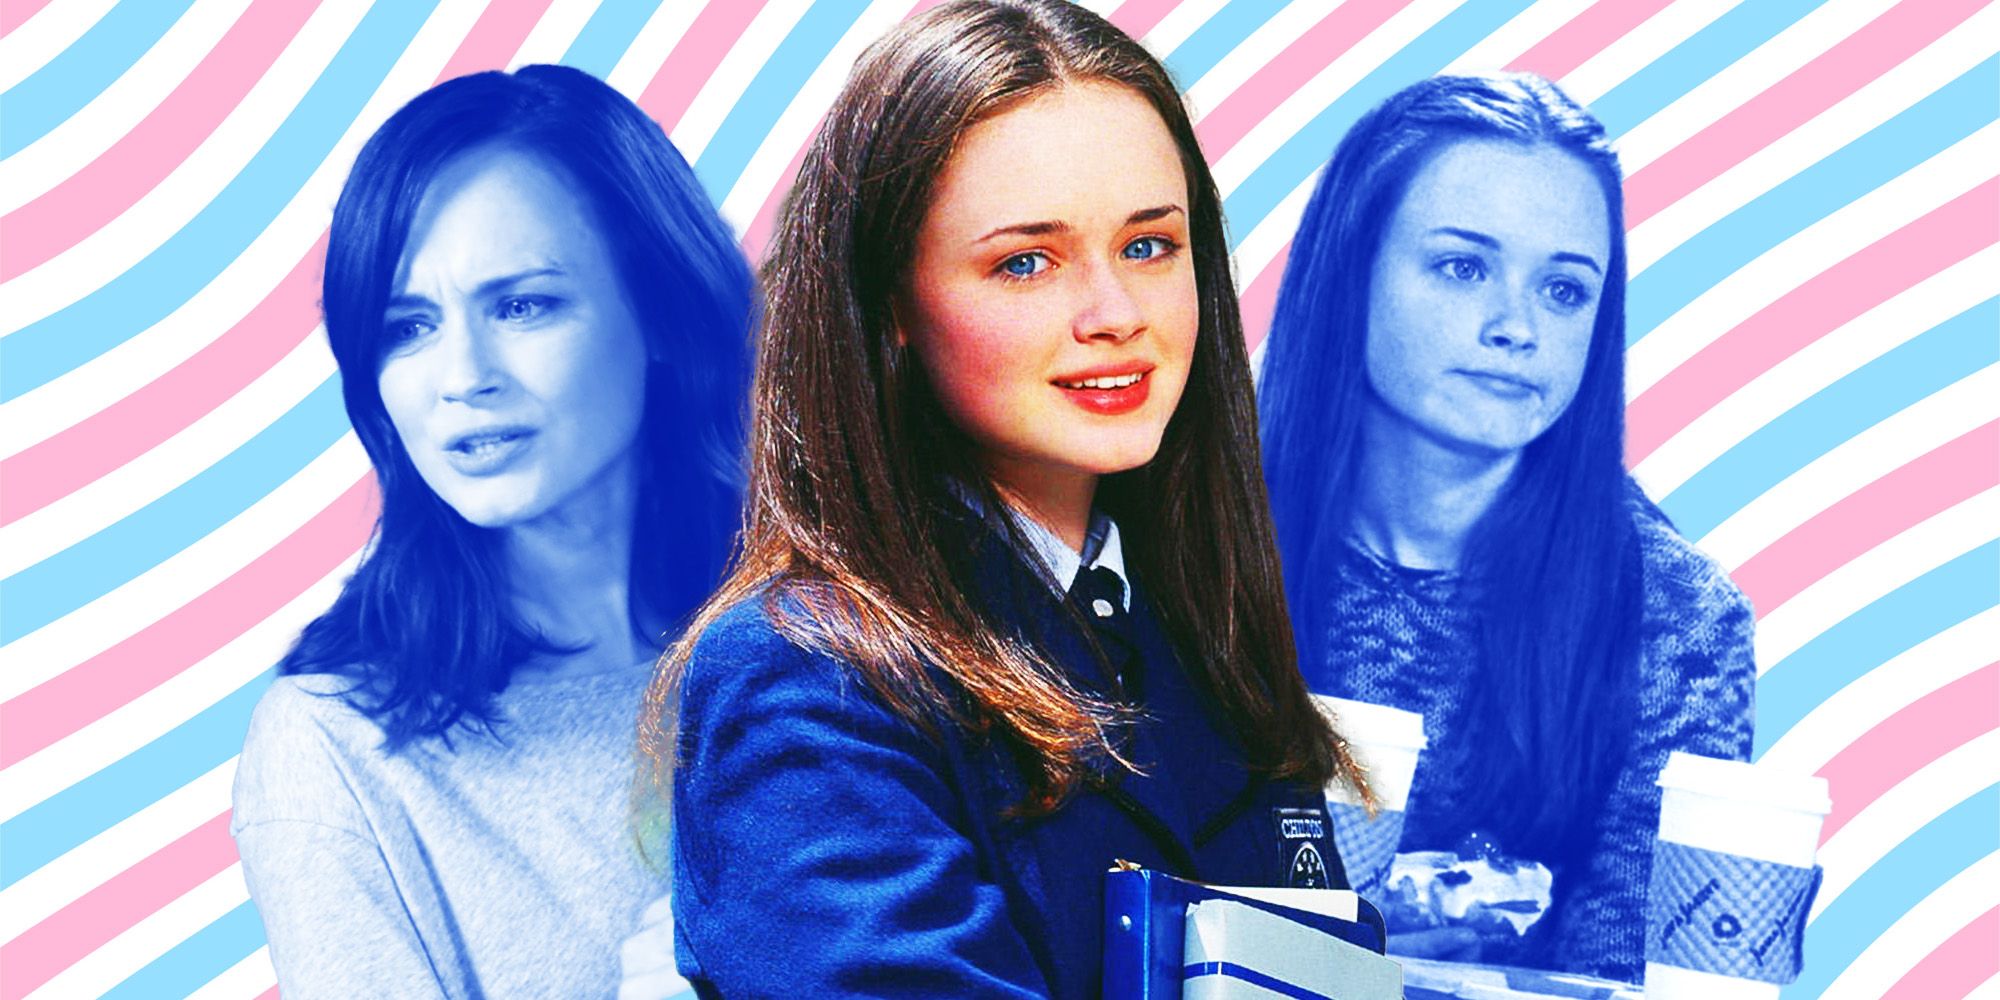 Alexis Bledel as Rory at different points of Gilmore Girls